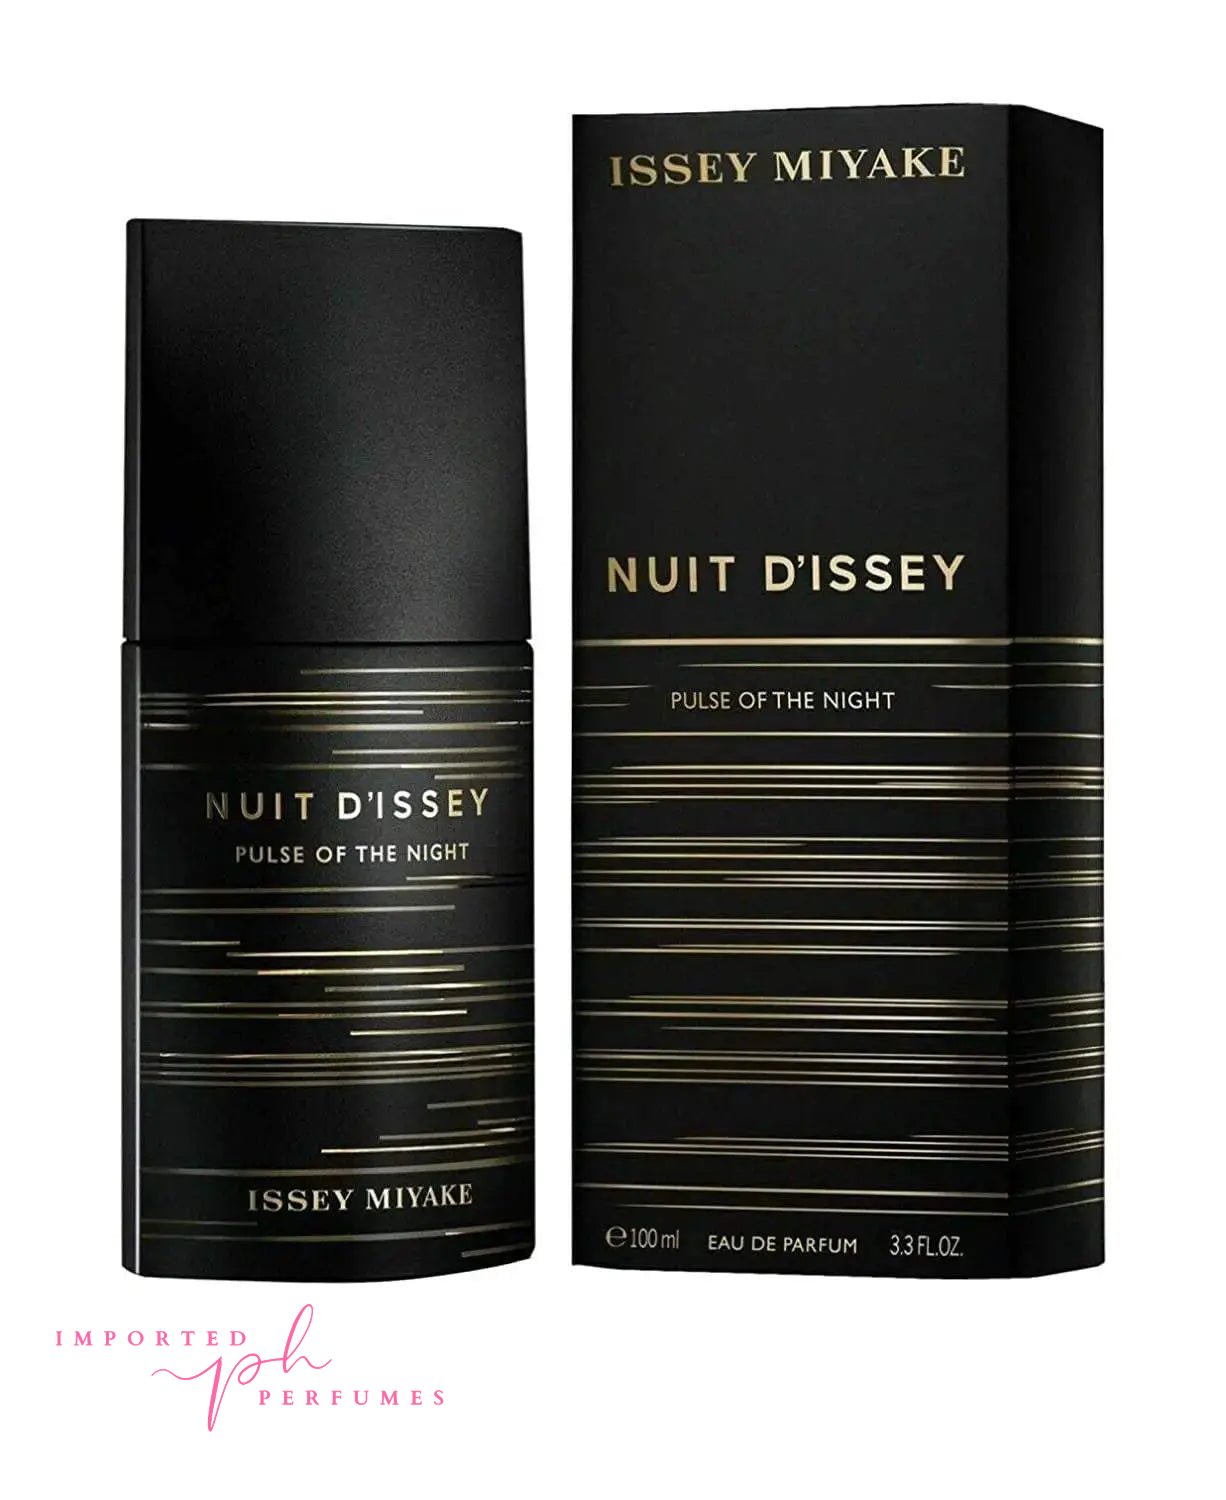 [TESTER] Issey Miyake Nuit D'issey Pulse of The Night Eau De Parfum 100ml Men Imported Perfumes Co